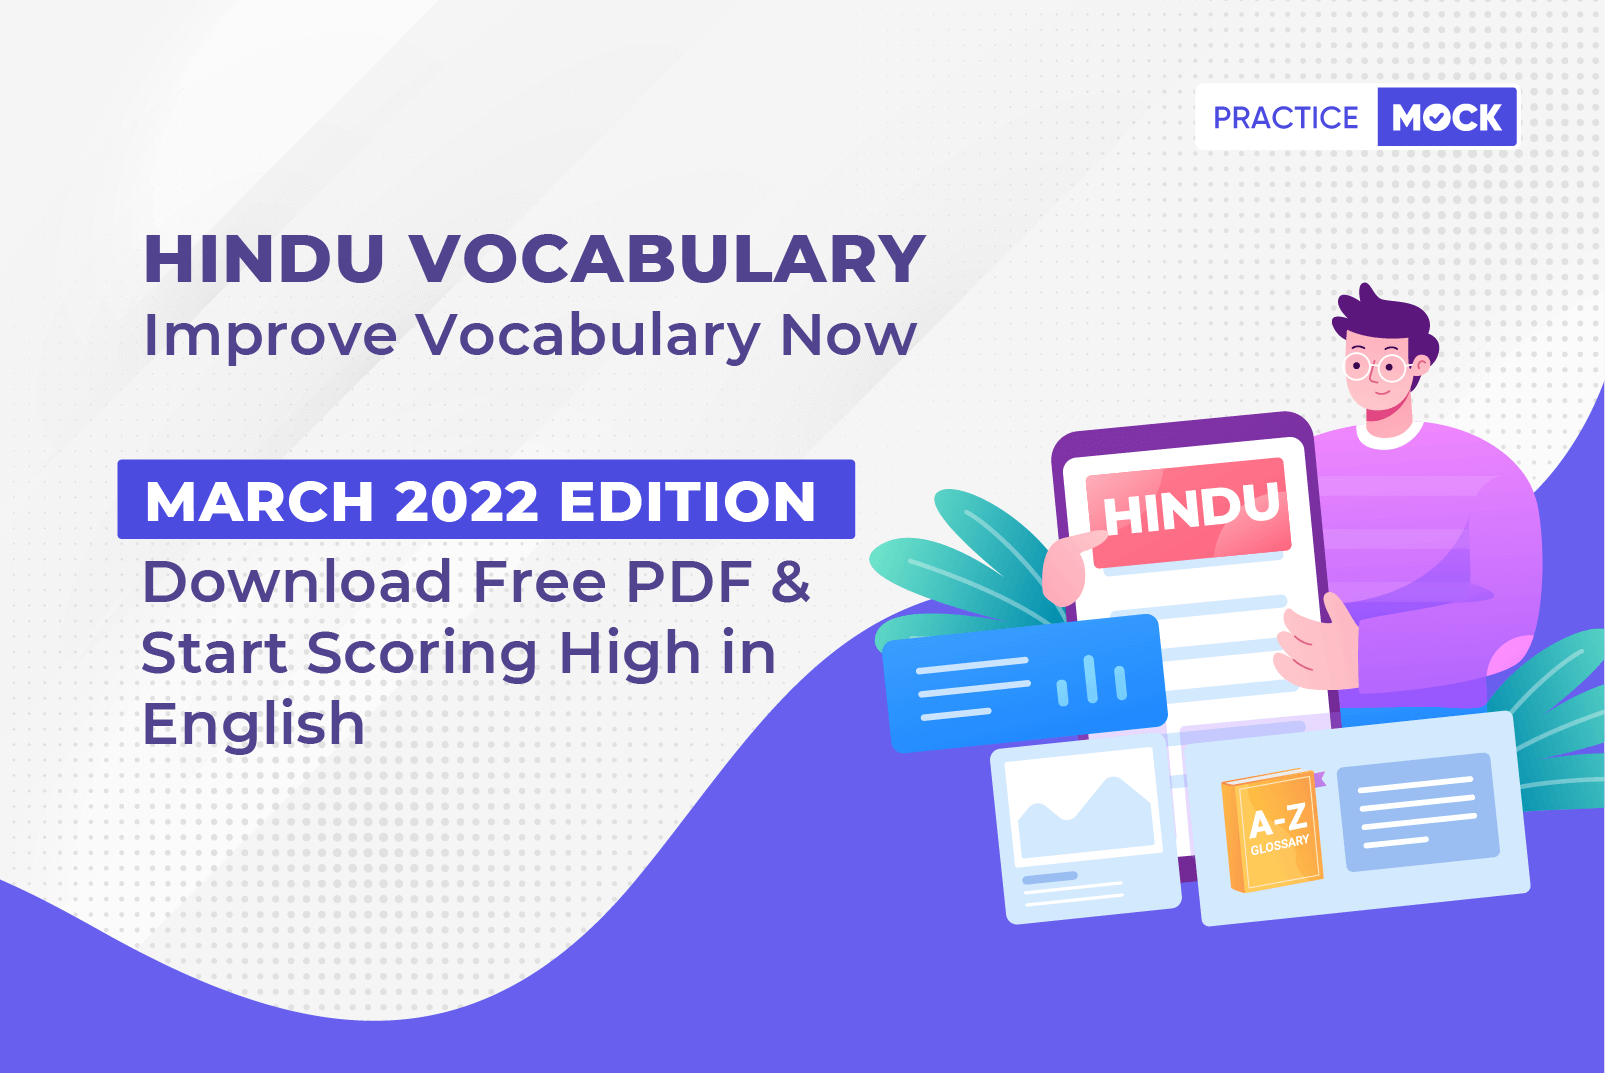 Learn New WordsPhrases- Hindu Vocabulary March 2022 PDF